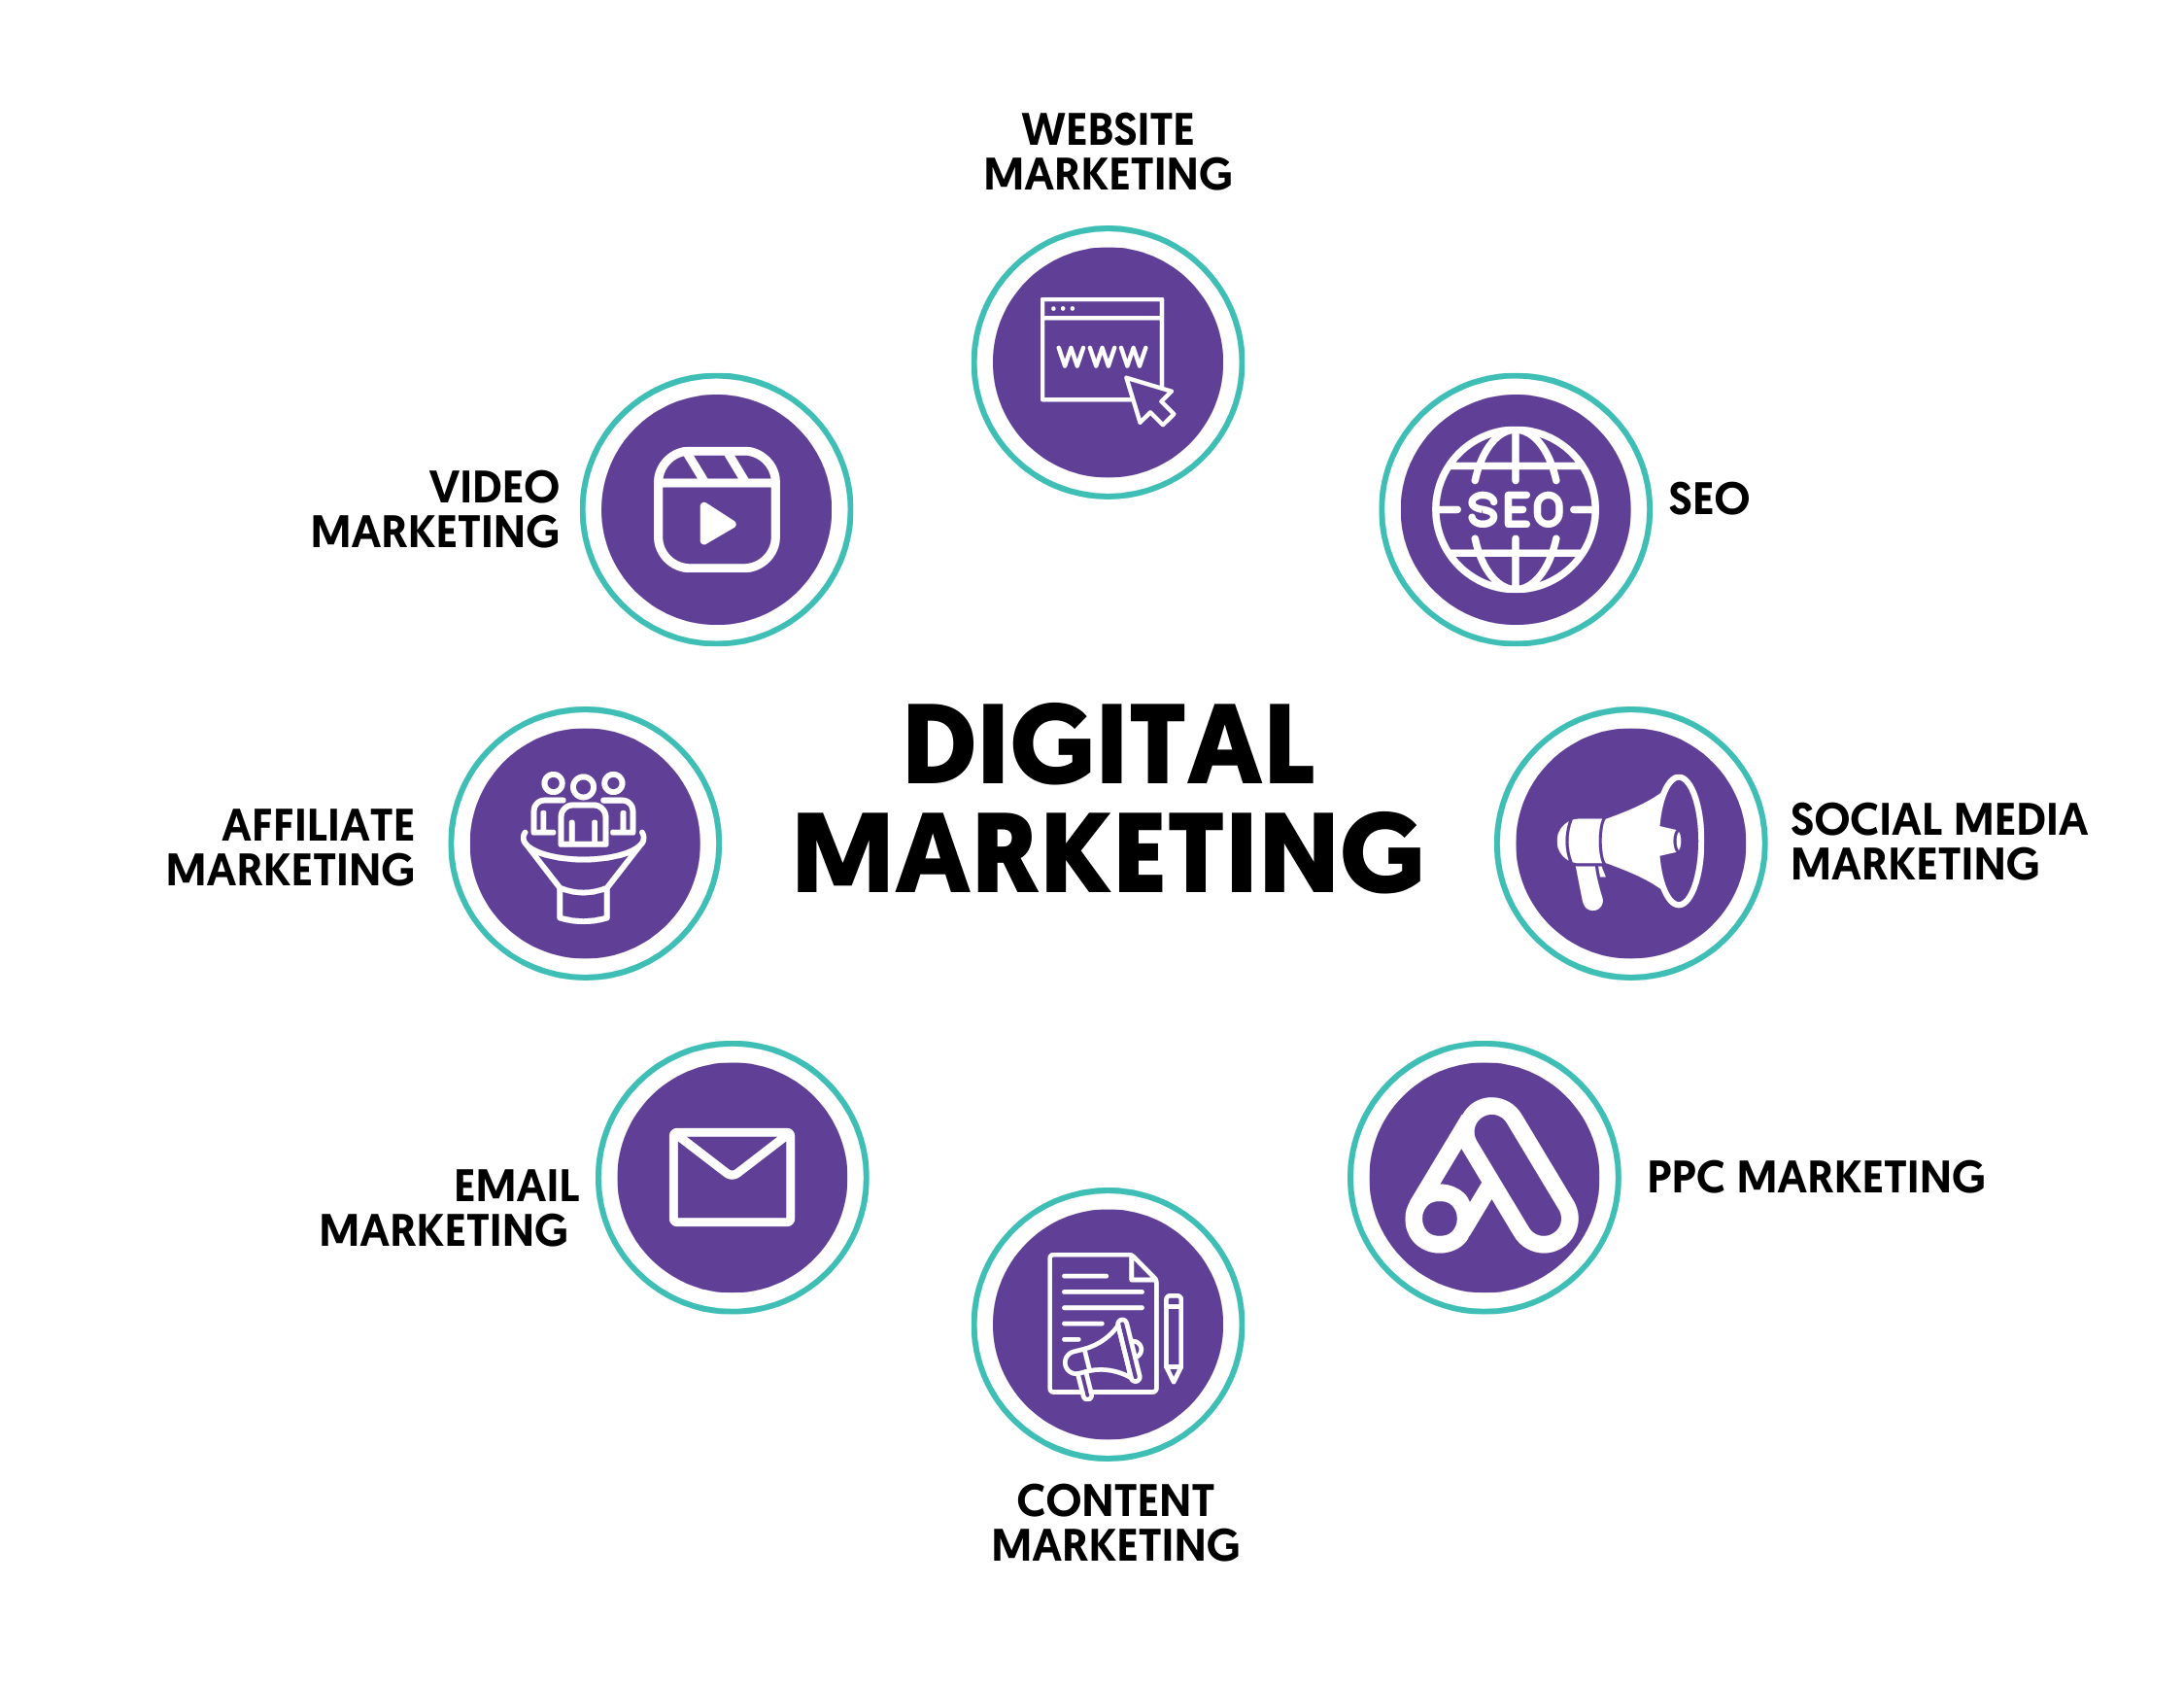 digital marketing definition with examples and descriptions in a circle with purple color filling the circles